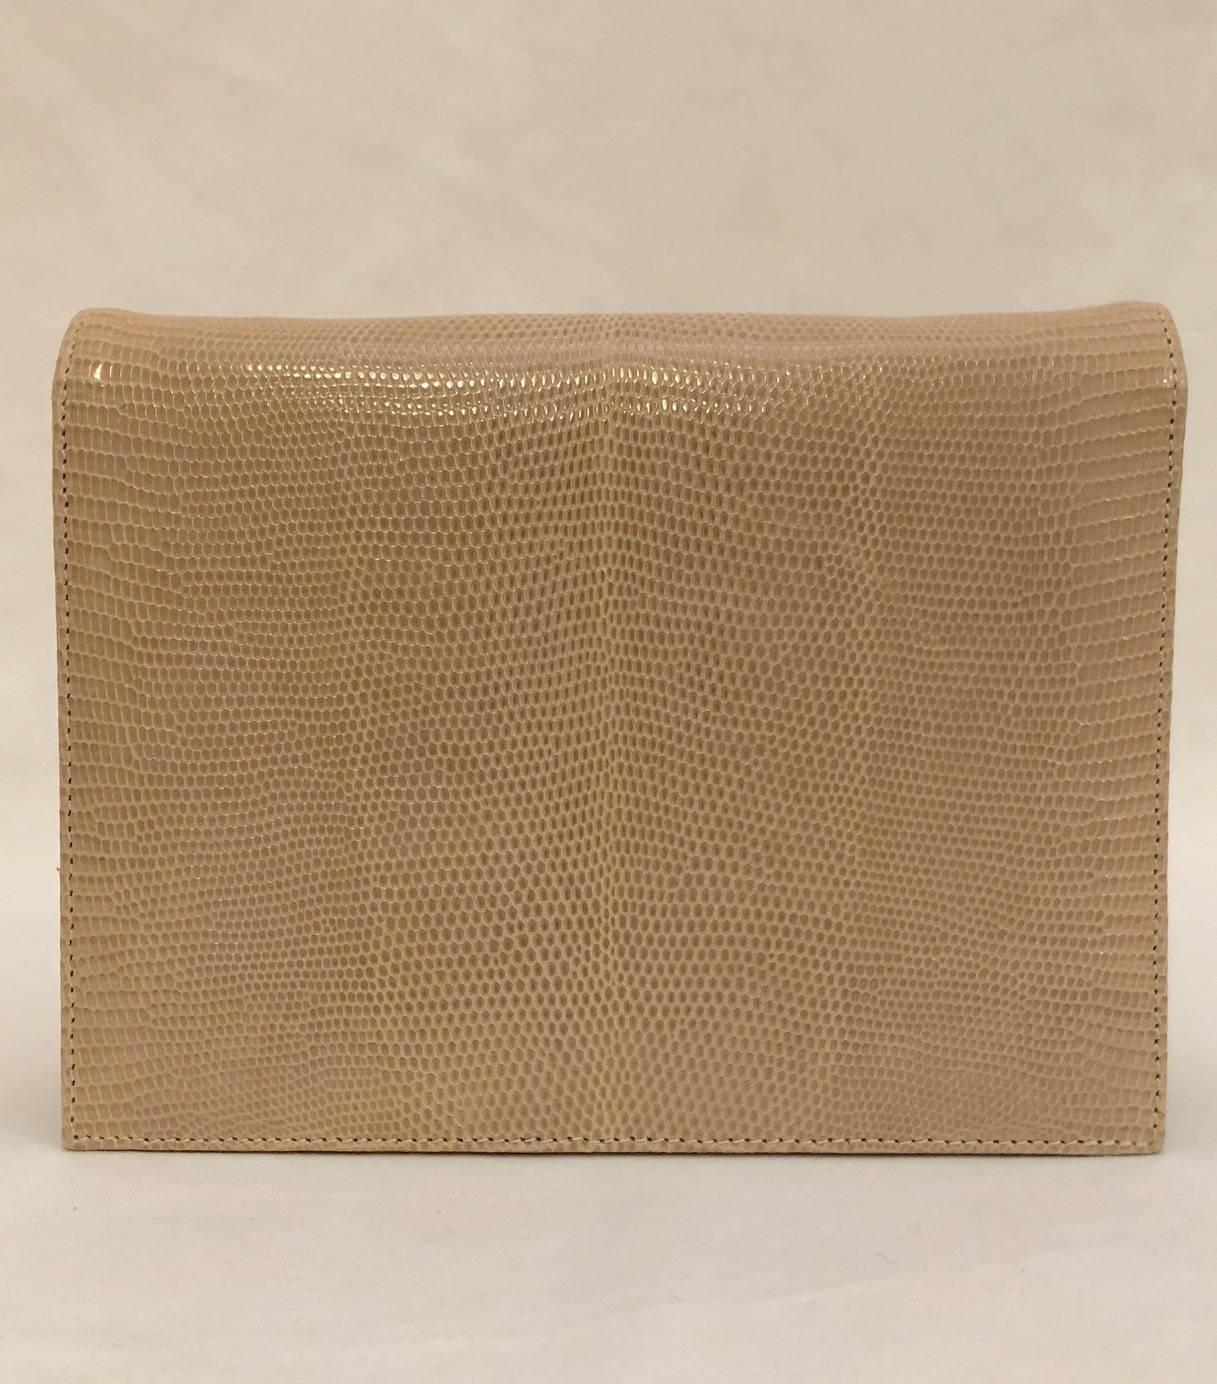 Lana Marks lizard skin bag is sure to please the most discerning collector! Luxurious, ultra-versatile beige bag includes one strap crafted from the same tan lizard. Of course, shoulder bag converts to a remarkable clutch!  Magnetic snap closure